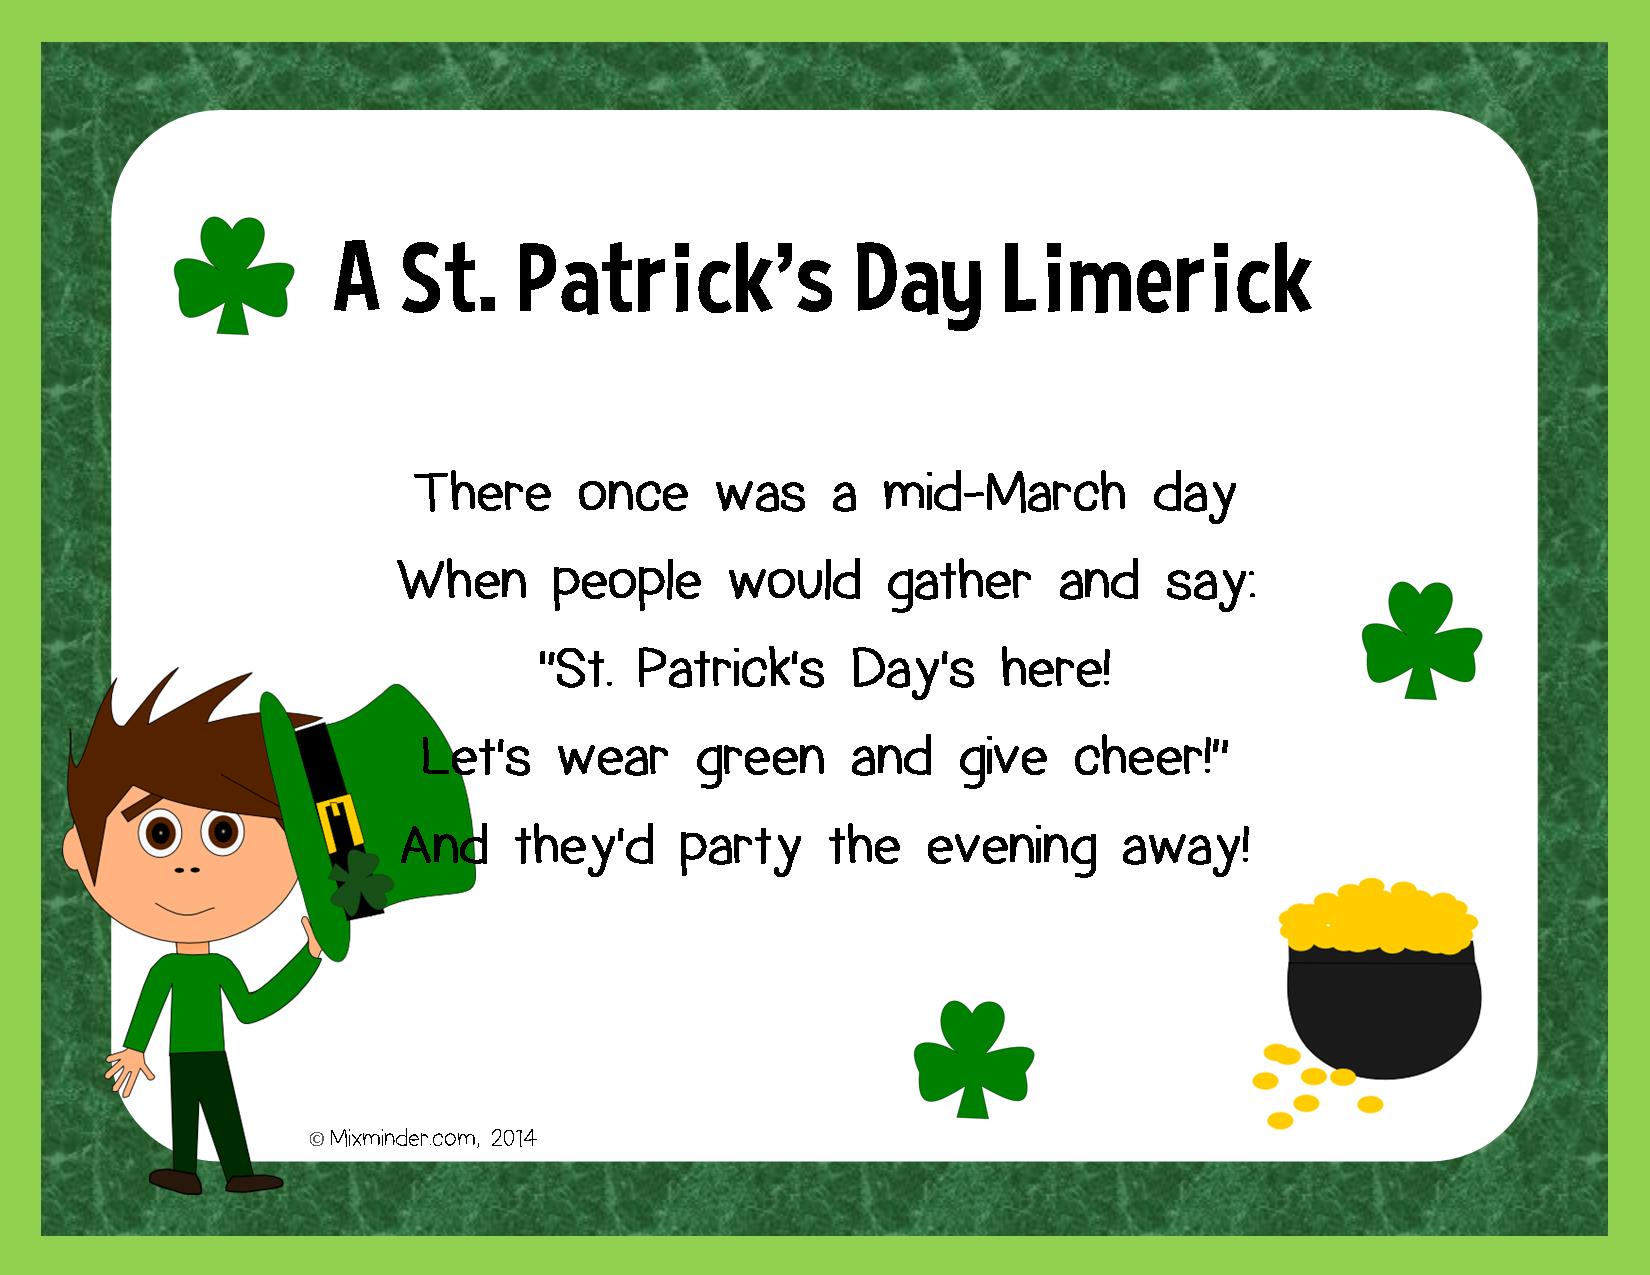 A Limerick for St. Patrick’s Day